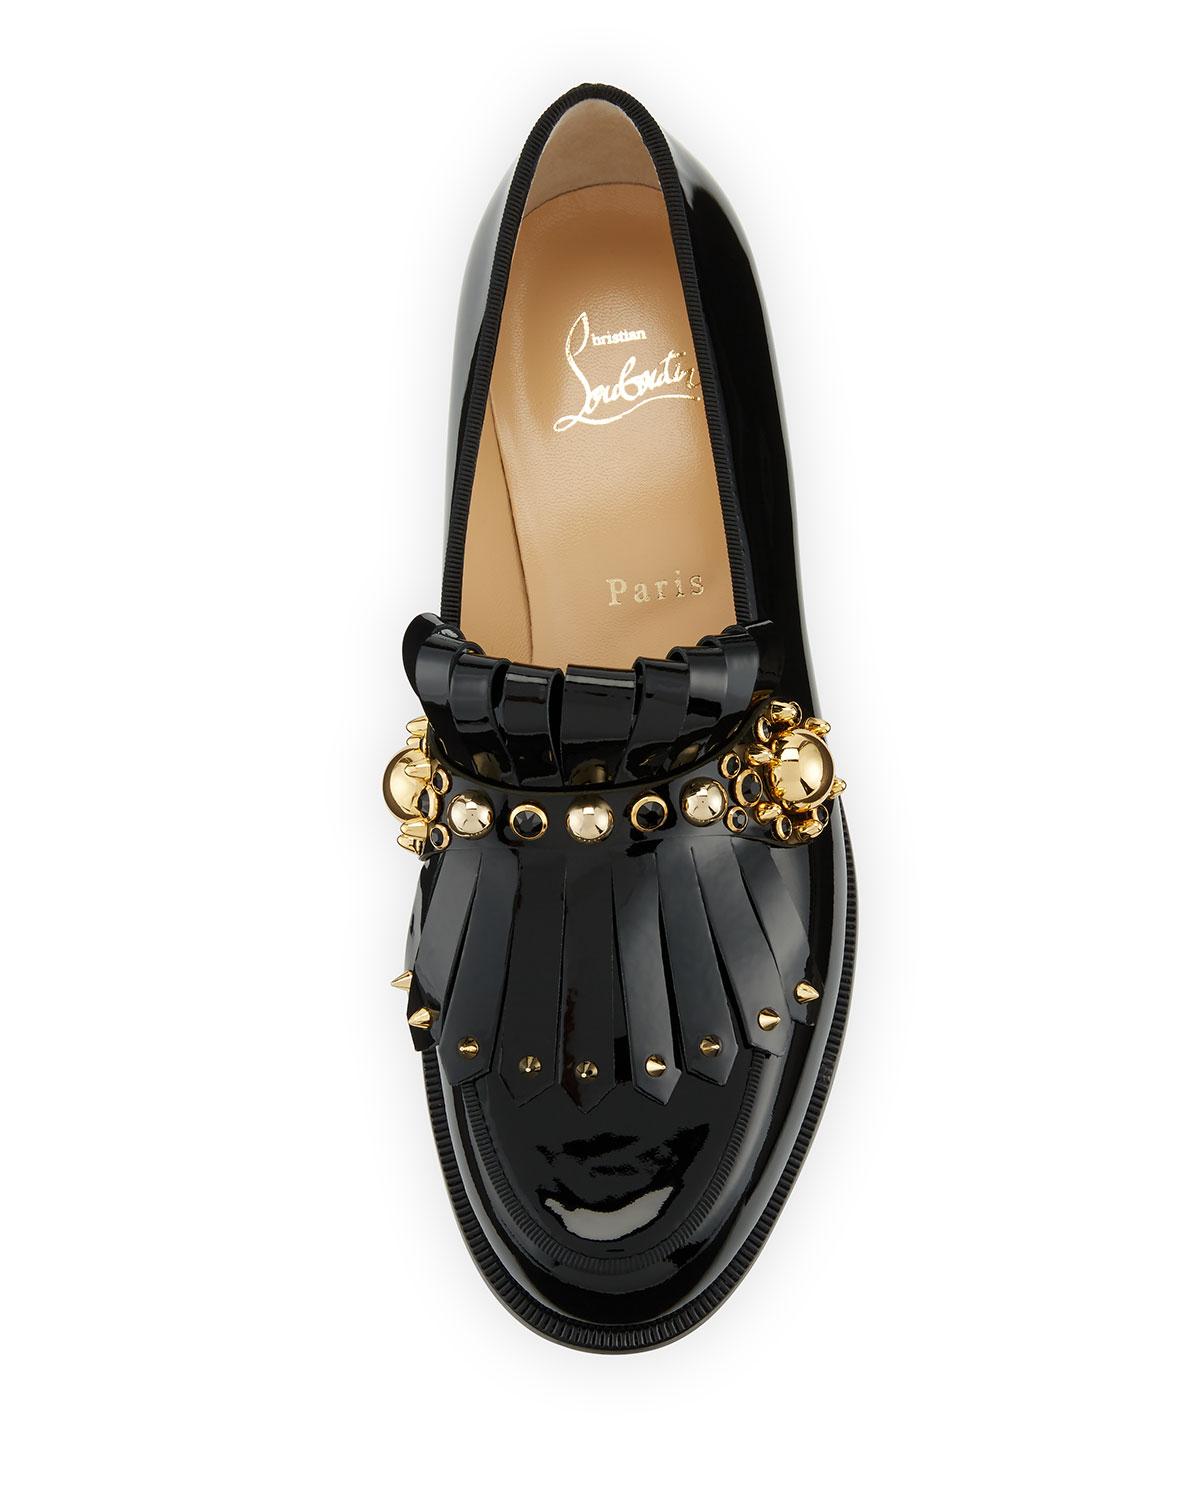 Christian Louboutin Octavian Patent Leather Loafers in Black (Grey) - Lyst